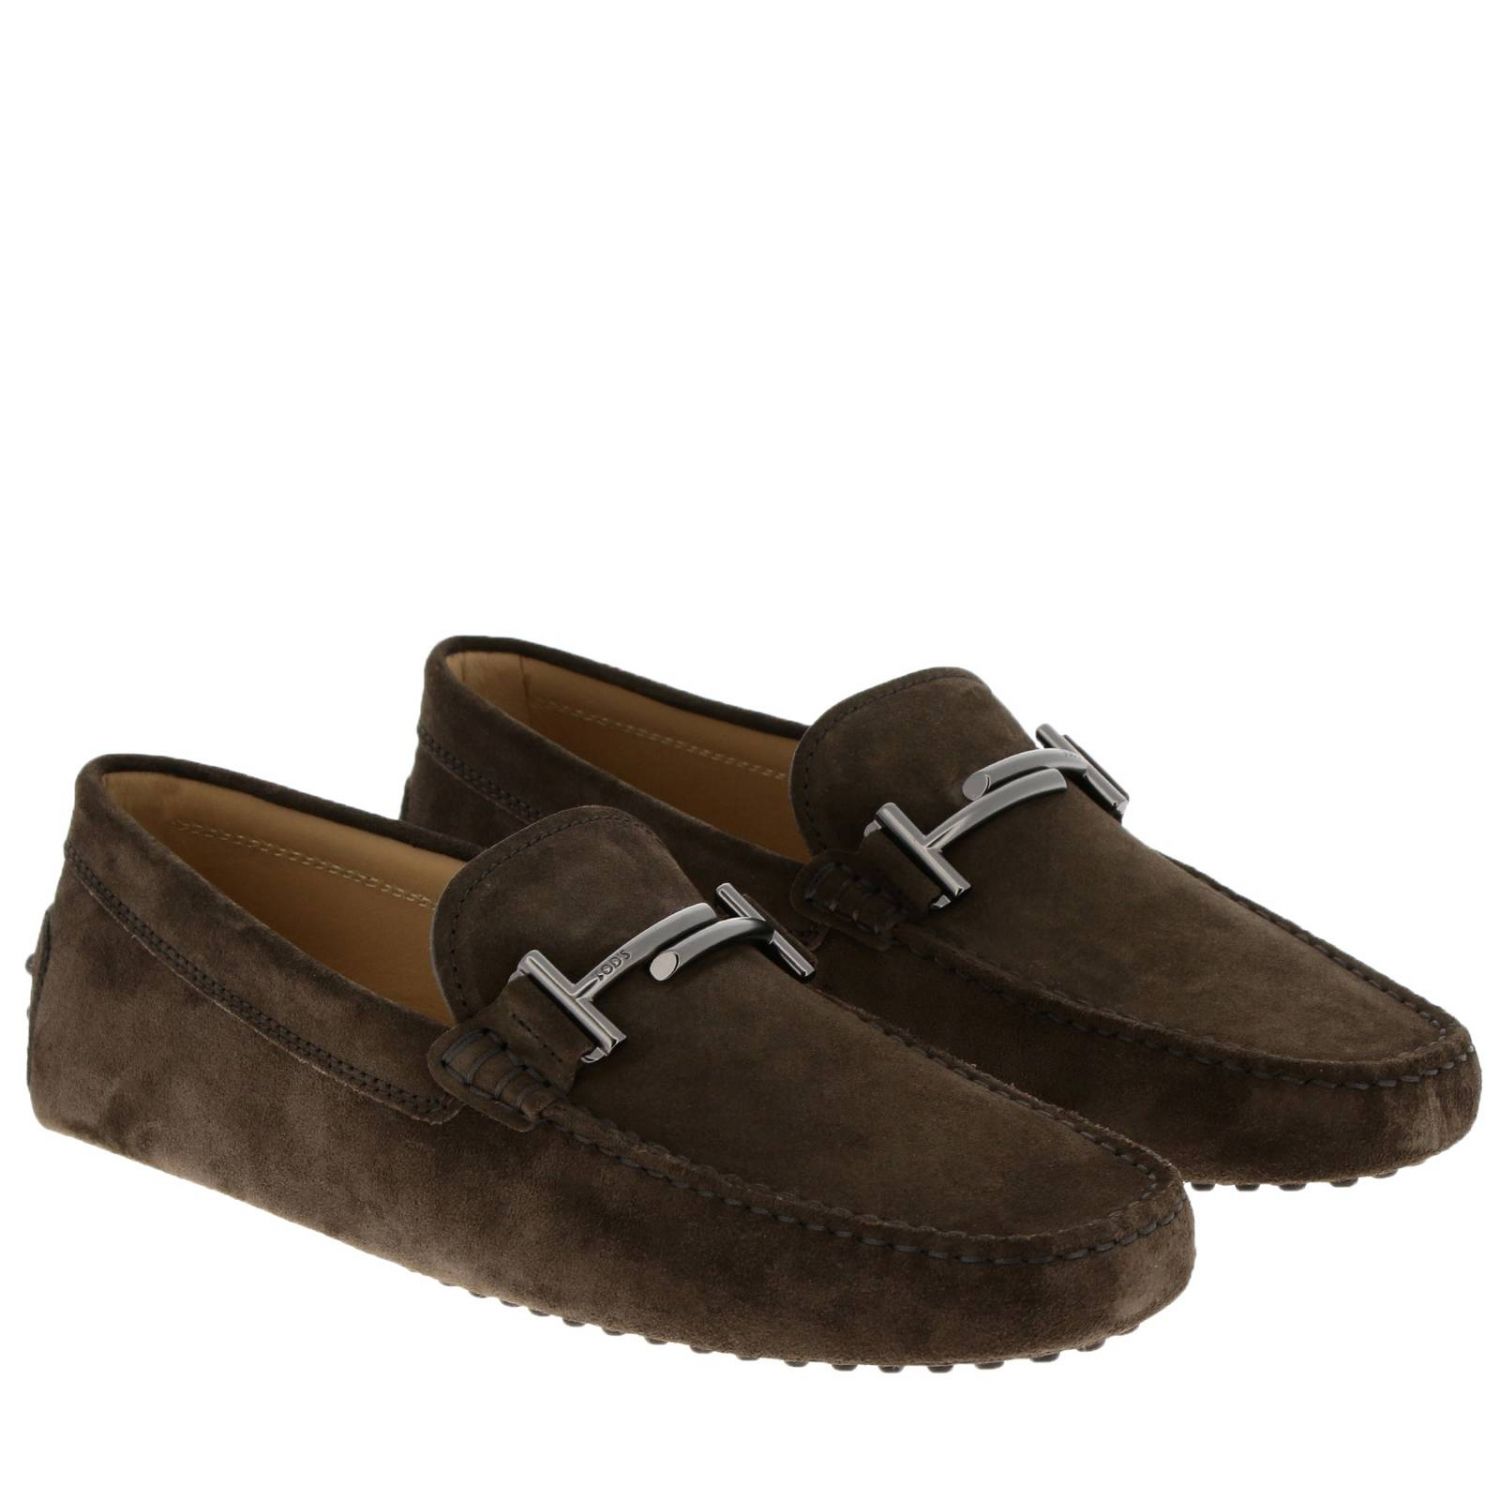 Shoes men Tod's | Loafers Tods Men Brown | Loafers Tods XXM0GW0Q700 RE0 ...